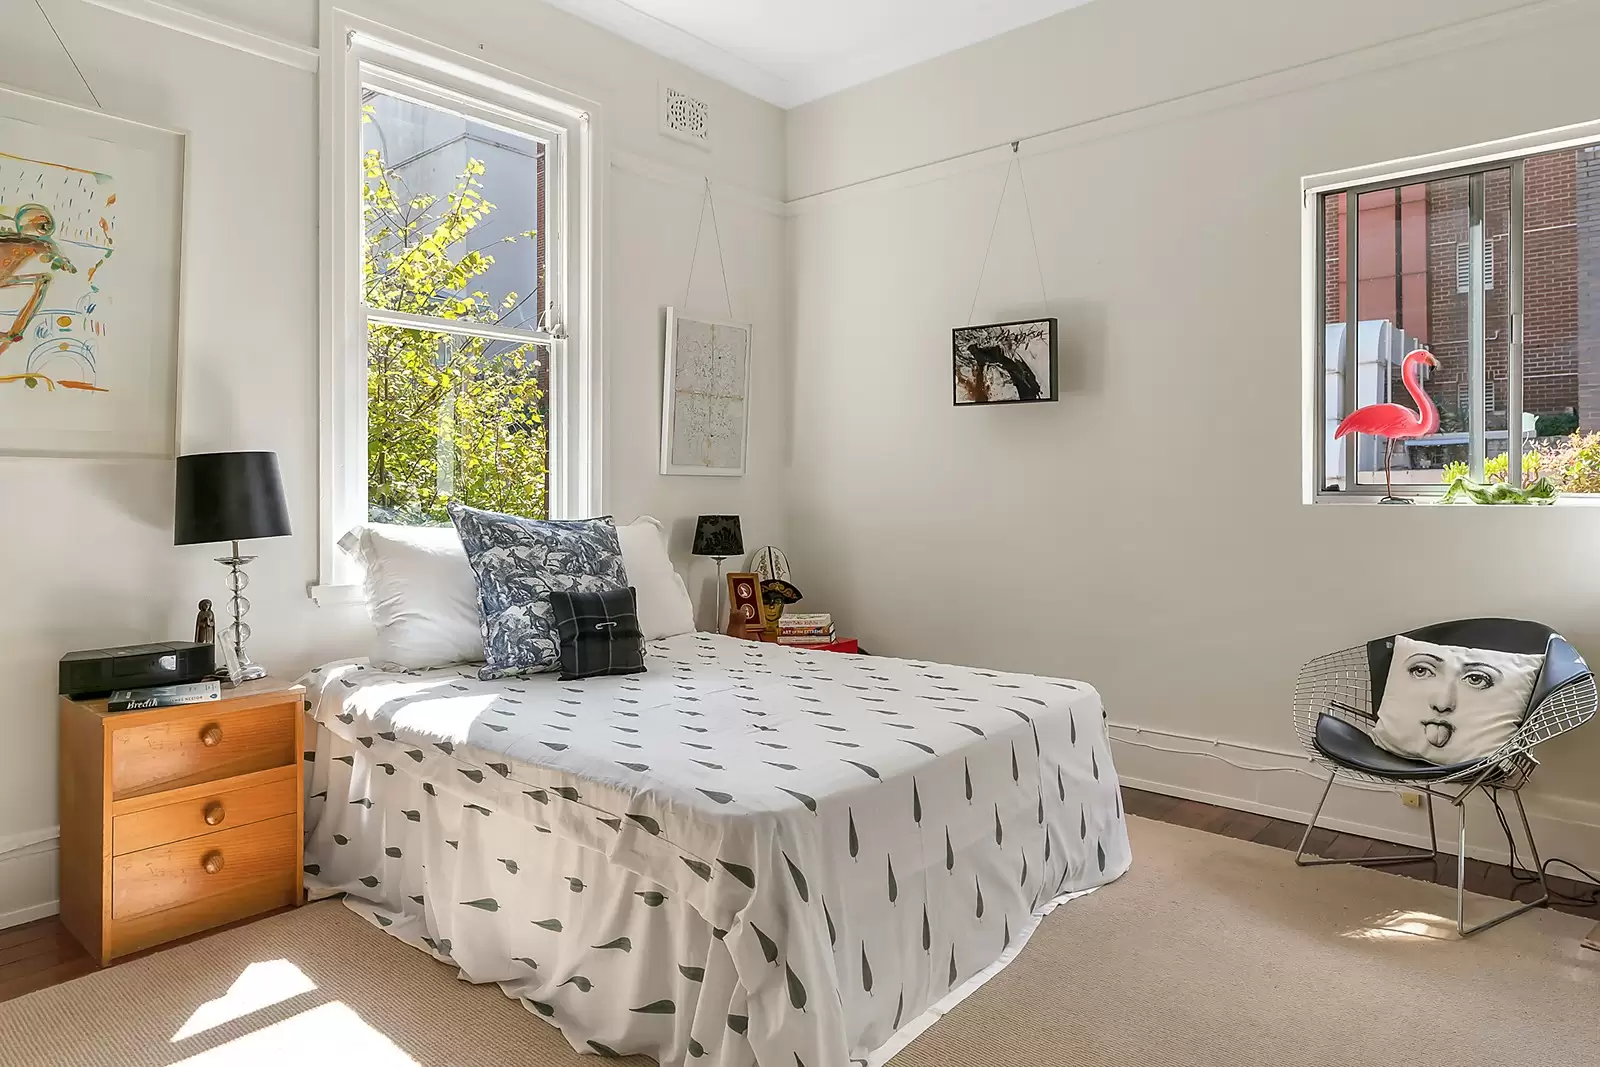 Photo #4: 11/38-40 Kings Cross Road, Potts Point - Sold by Sydney Sotheby's International Realty